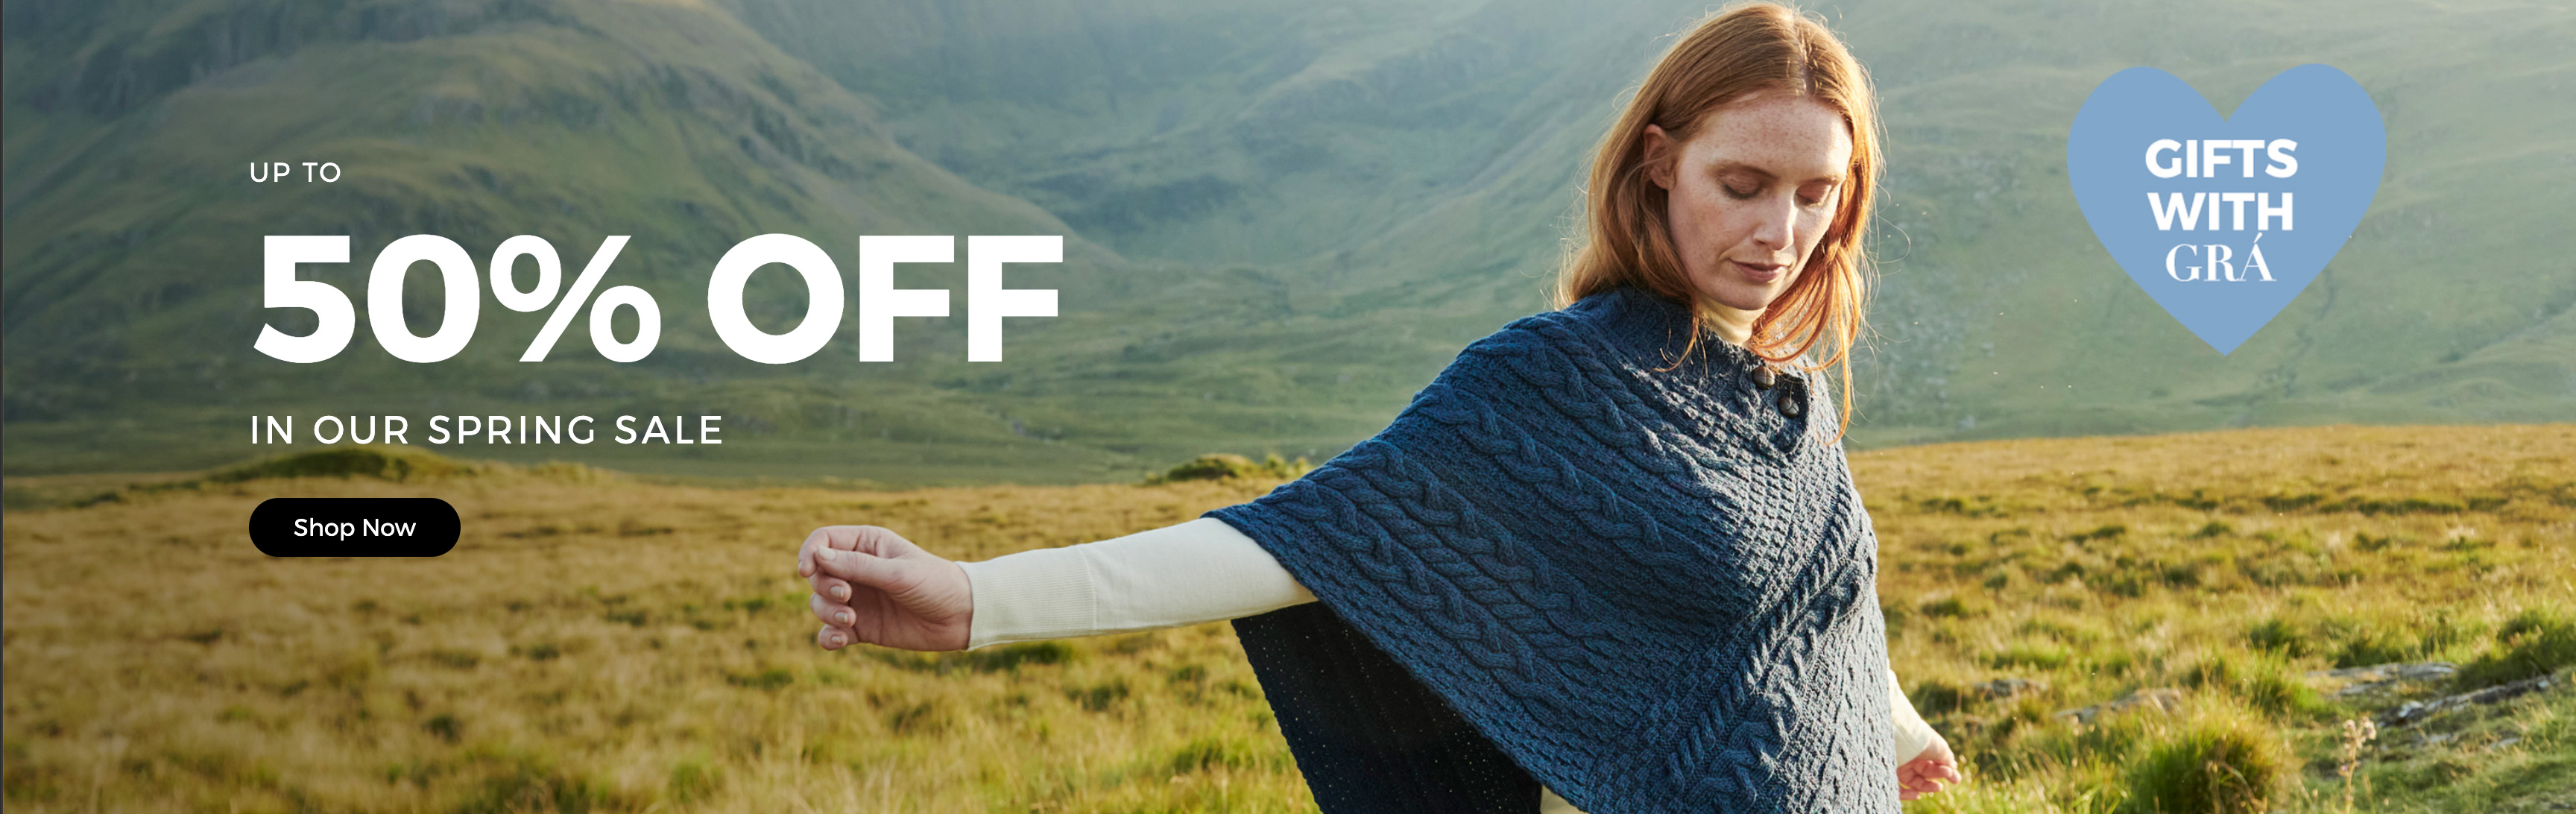 Shop up to 50% off in our spring sale!